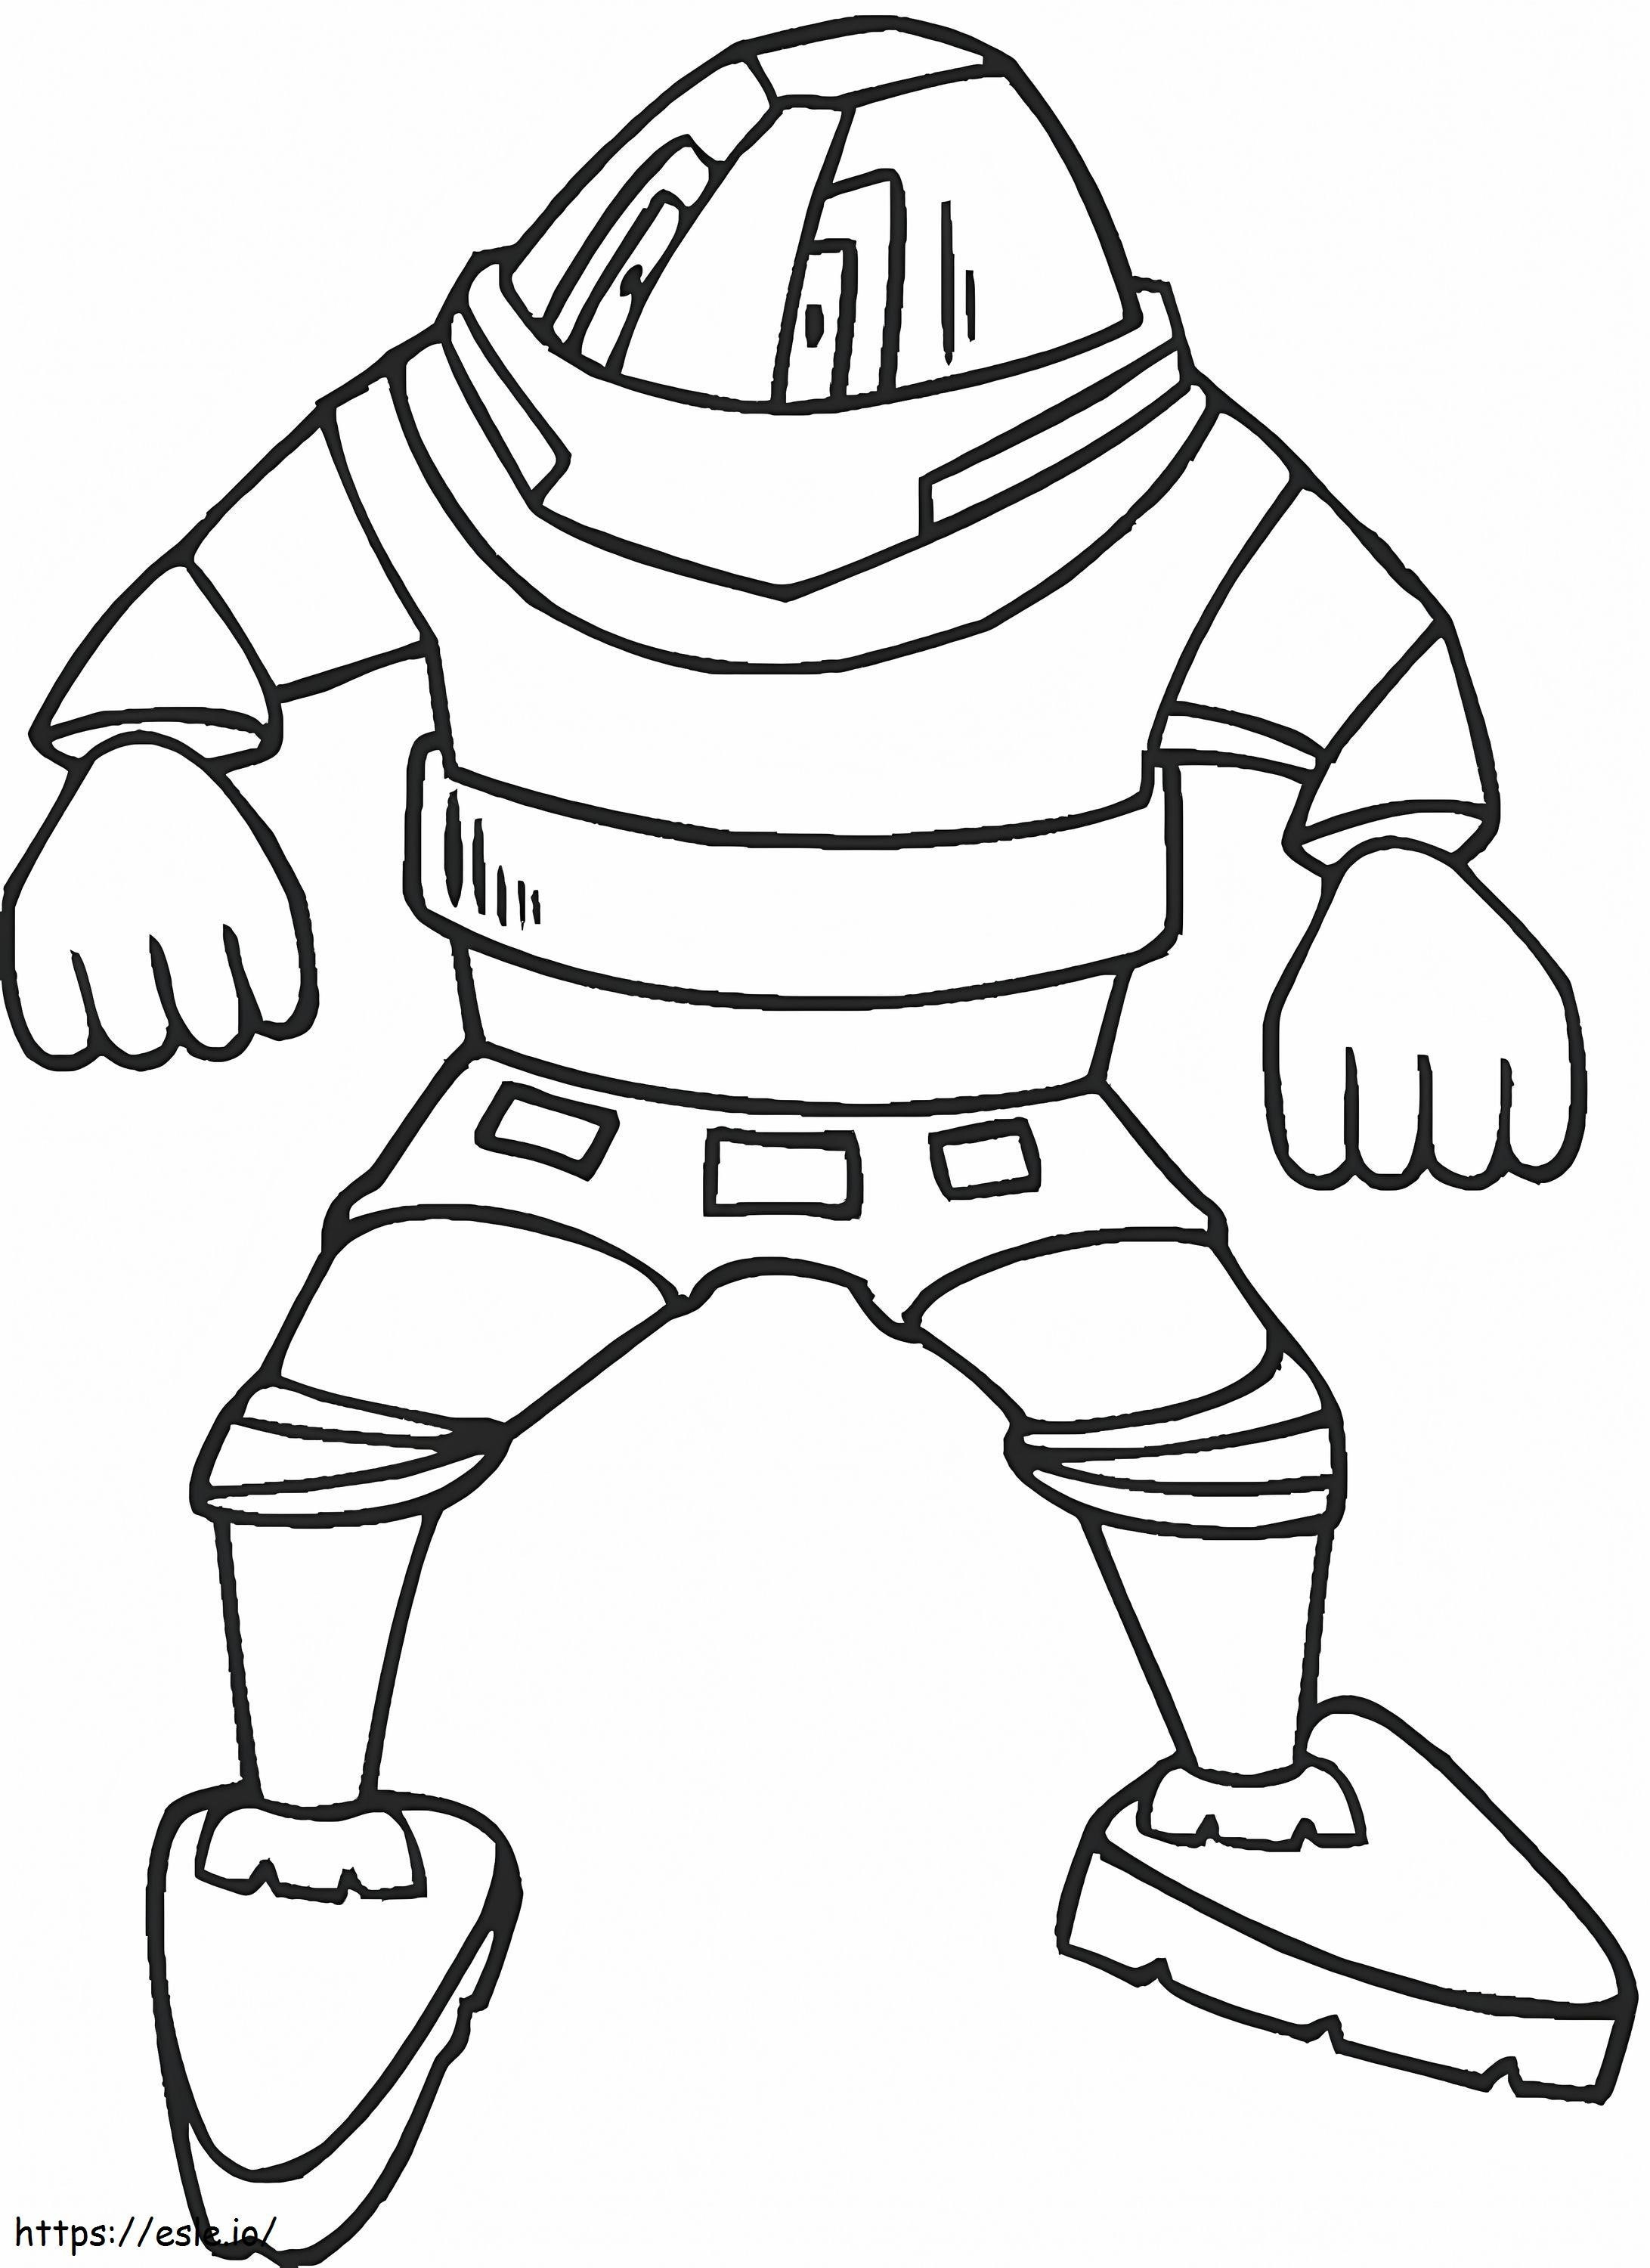 Strong Robot coloring page